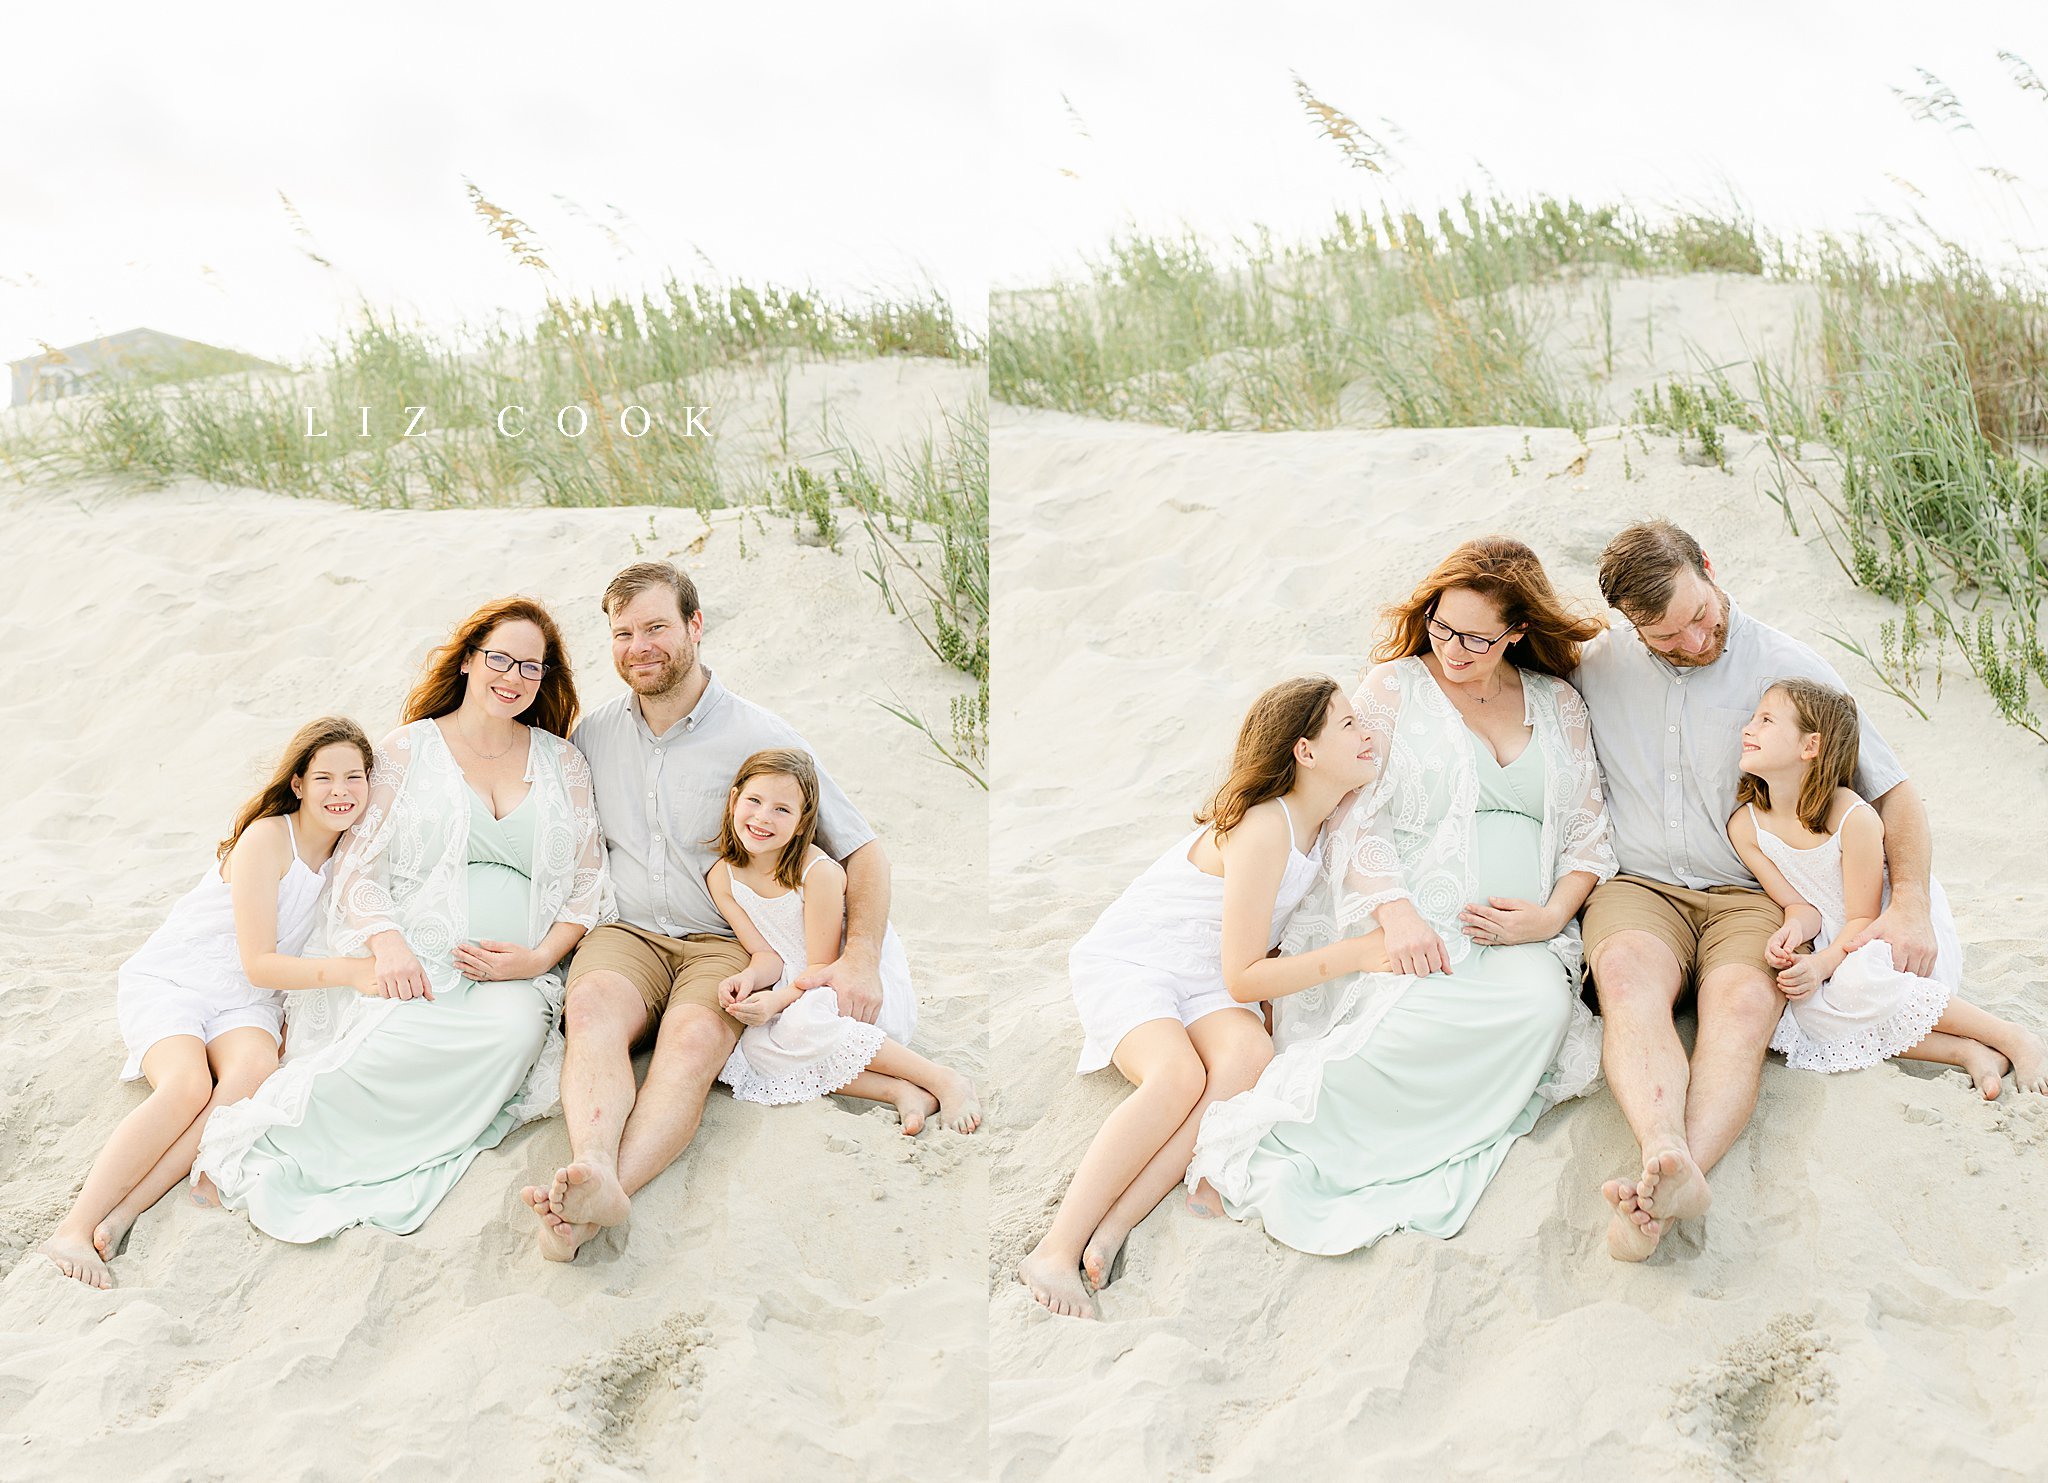 maternity-pictures-on-beach-liz-cook-photography-caroline-jean-photography_0014.jpg